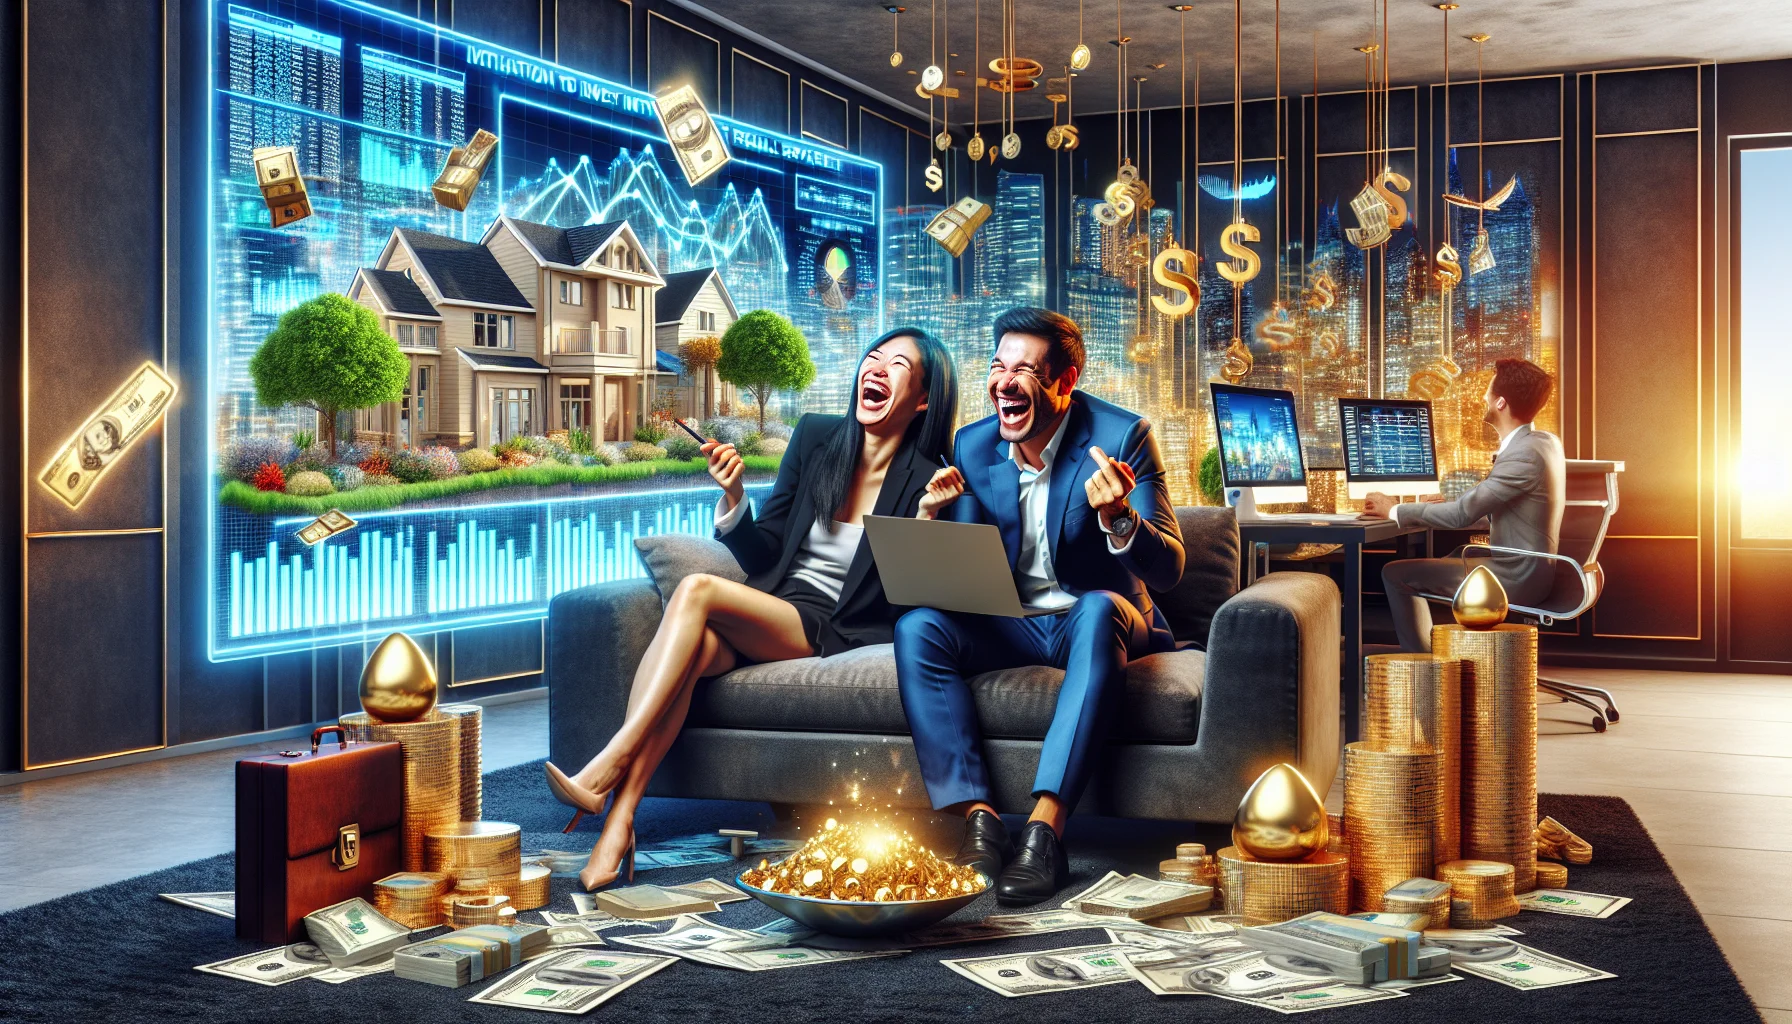 Imagine a humorous scene that demonstrates the ideal way to invest in real estate without actually purchasing property. Perhaps one could observe a South Asian woman and a Hispanic man, both sophisticated investors, sharing a hearty laugh while virtually flipping through a digital portfolio of properties on a futuristic hologram device. They're seated on a lush, comfortable couch in a chic, modern office space, surrounded by glowing reports of profitable investments. There are also metaphorical symbols strewn about the room, such as golden eggs in a nest and a tree growing money to symbolize the potential wealth their strategy can bring.